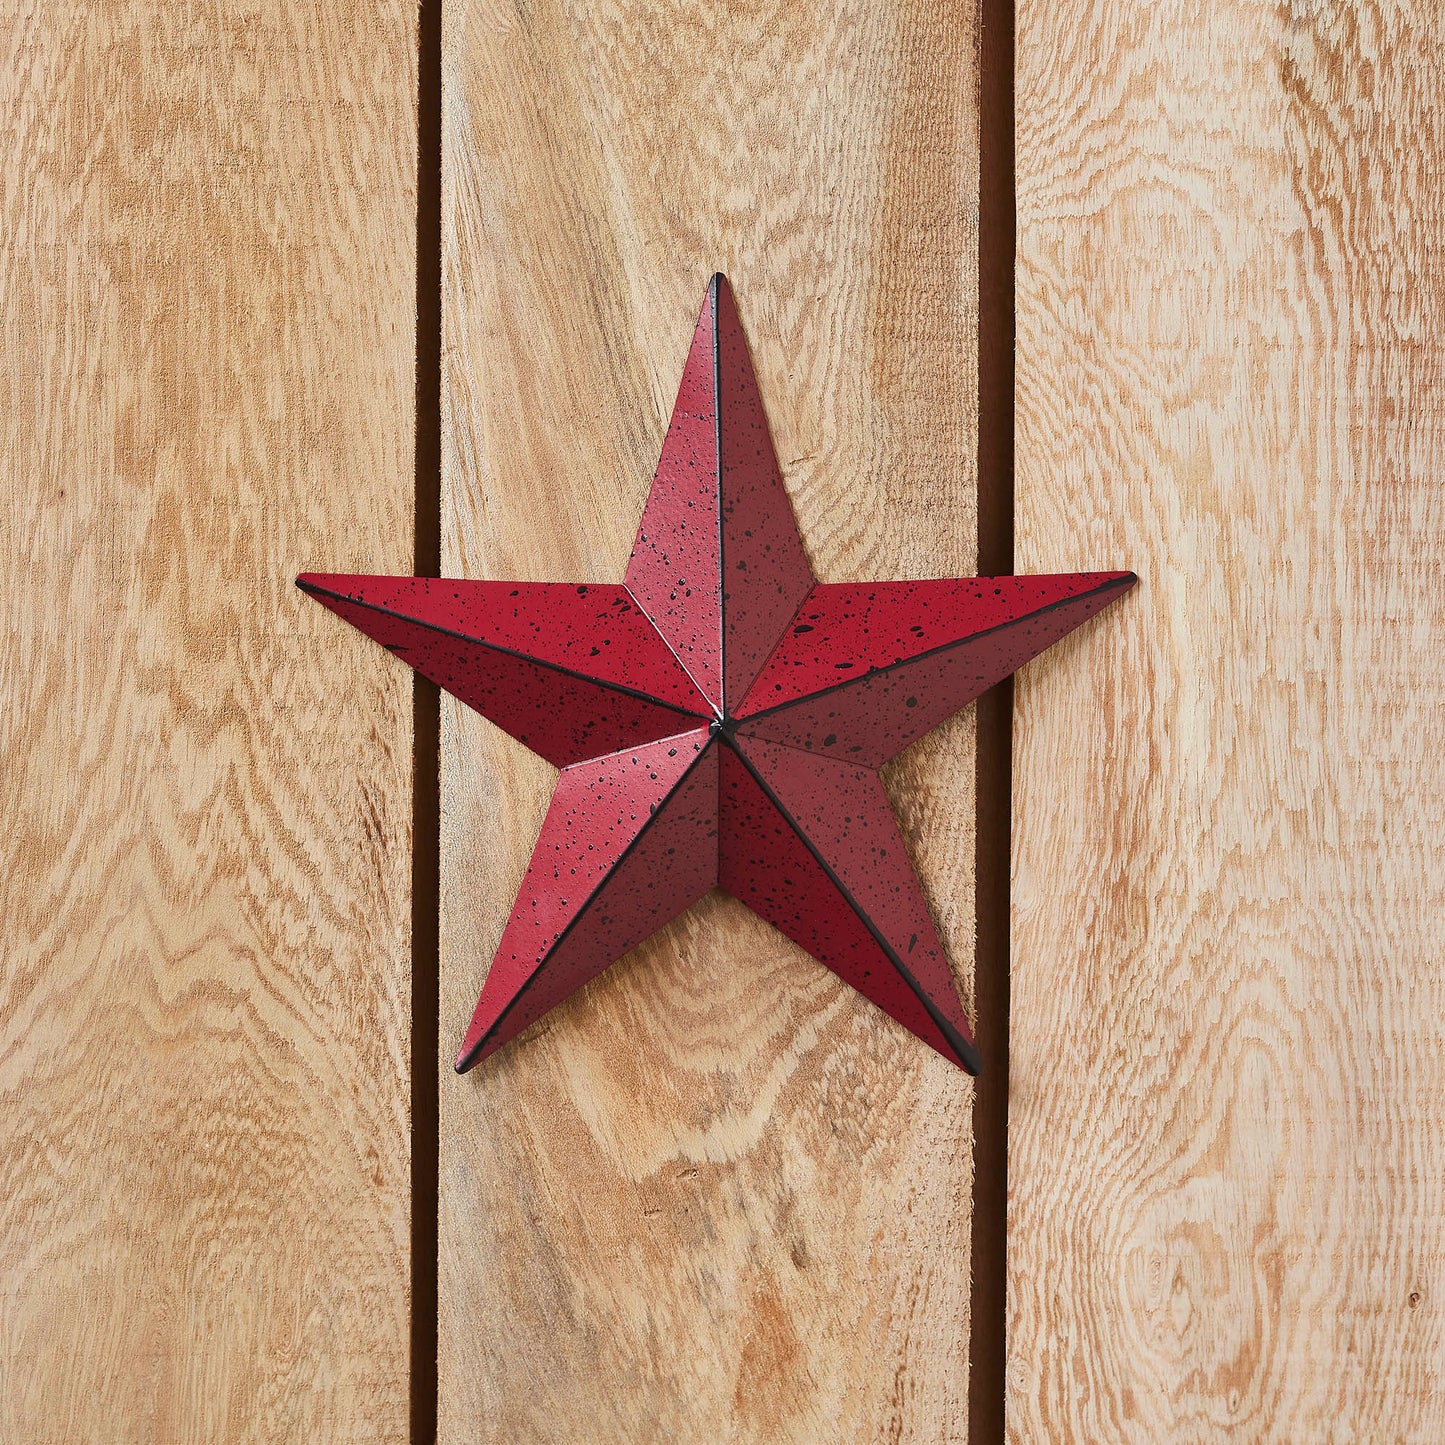 VHC Brands Patriotic Faceted Metal Star Burgundy Wall Hanging 8x8, Independence Day Decor, American Star Design, Distressed Appearance Metal Wall Hanging,  Star Shape, Country, Burgundy